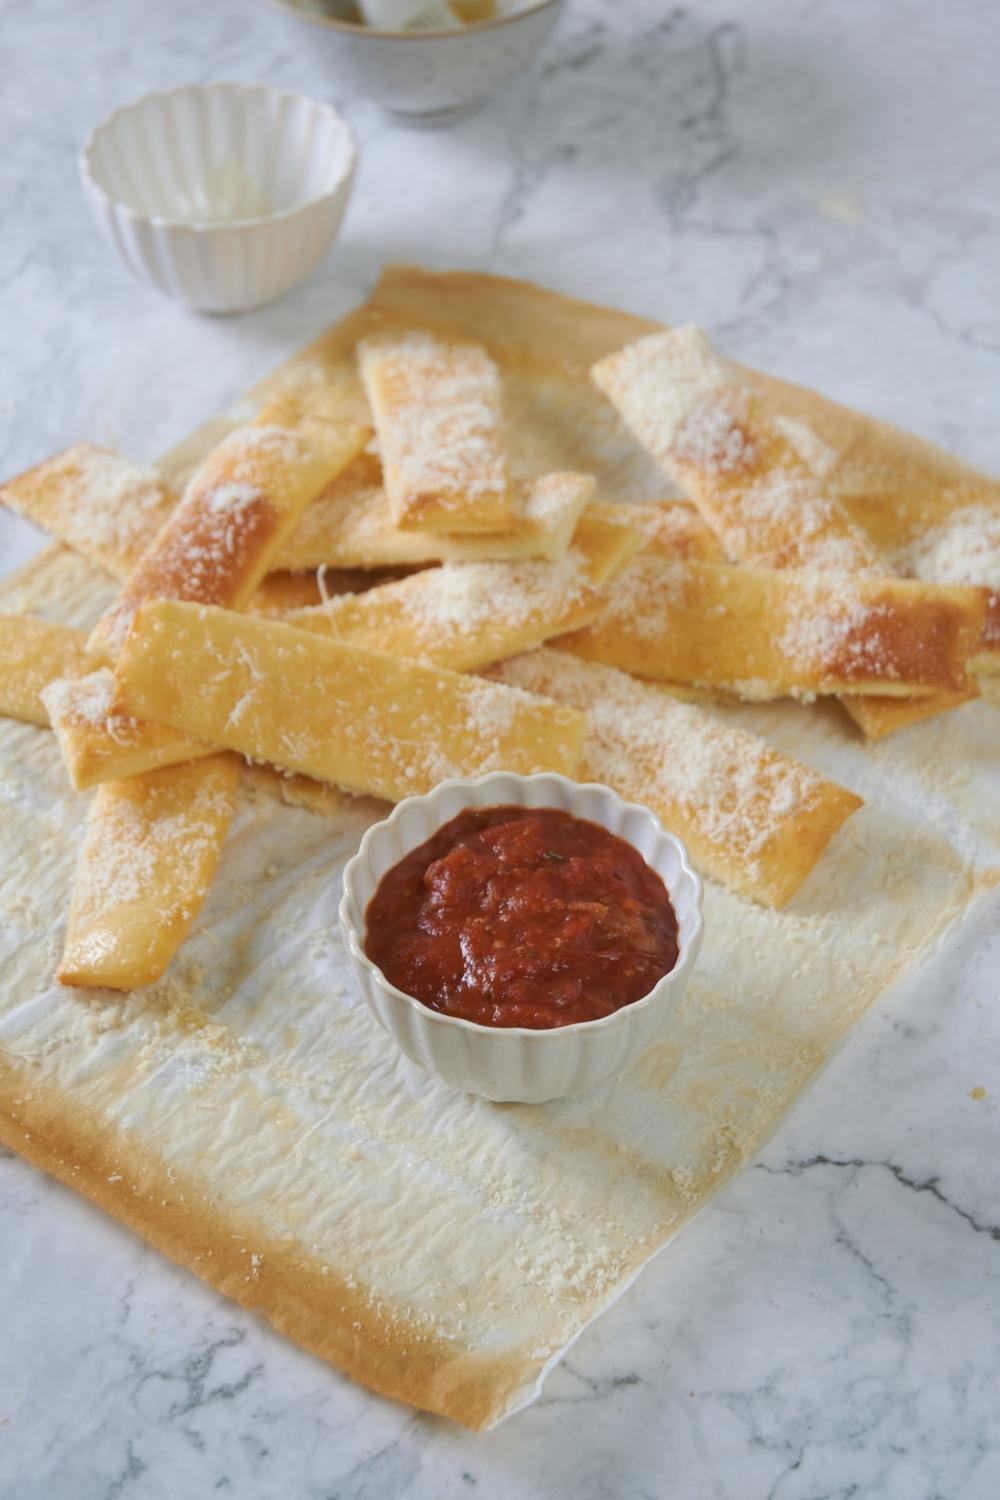 A pile of homemade little caesar's crazy bread sticks lay on a parchment paper sheet. A side bowl with pizza sauce sits next to them.